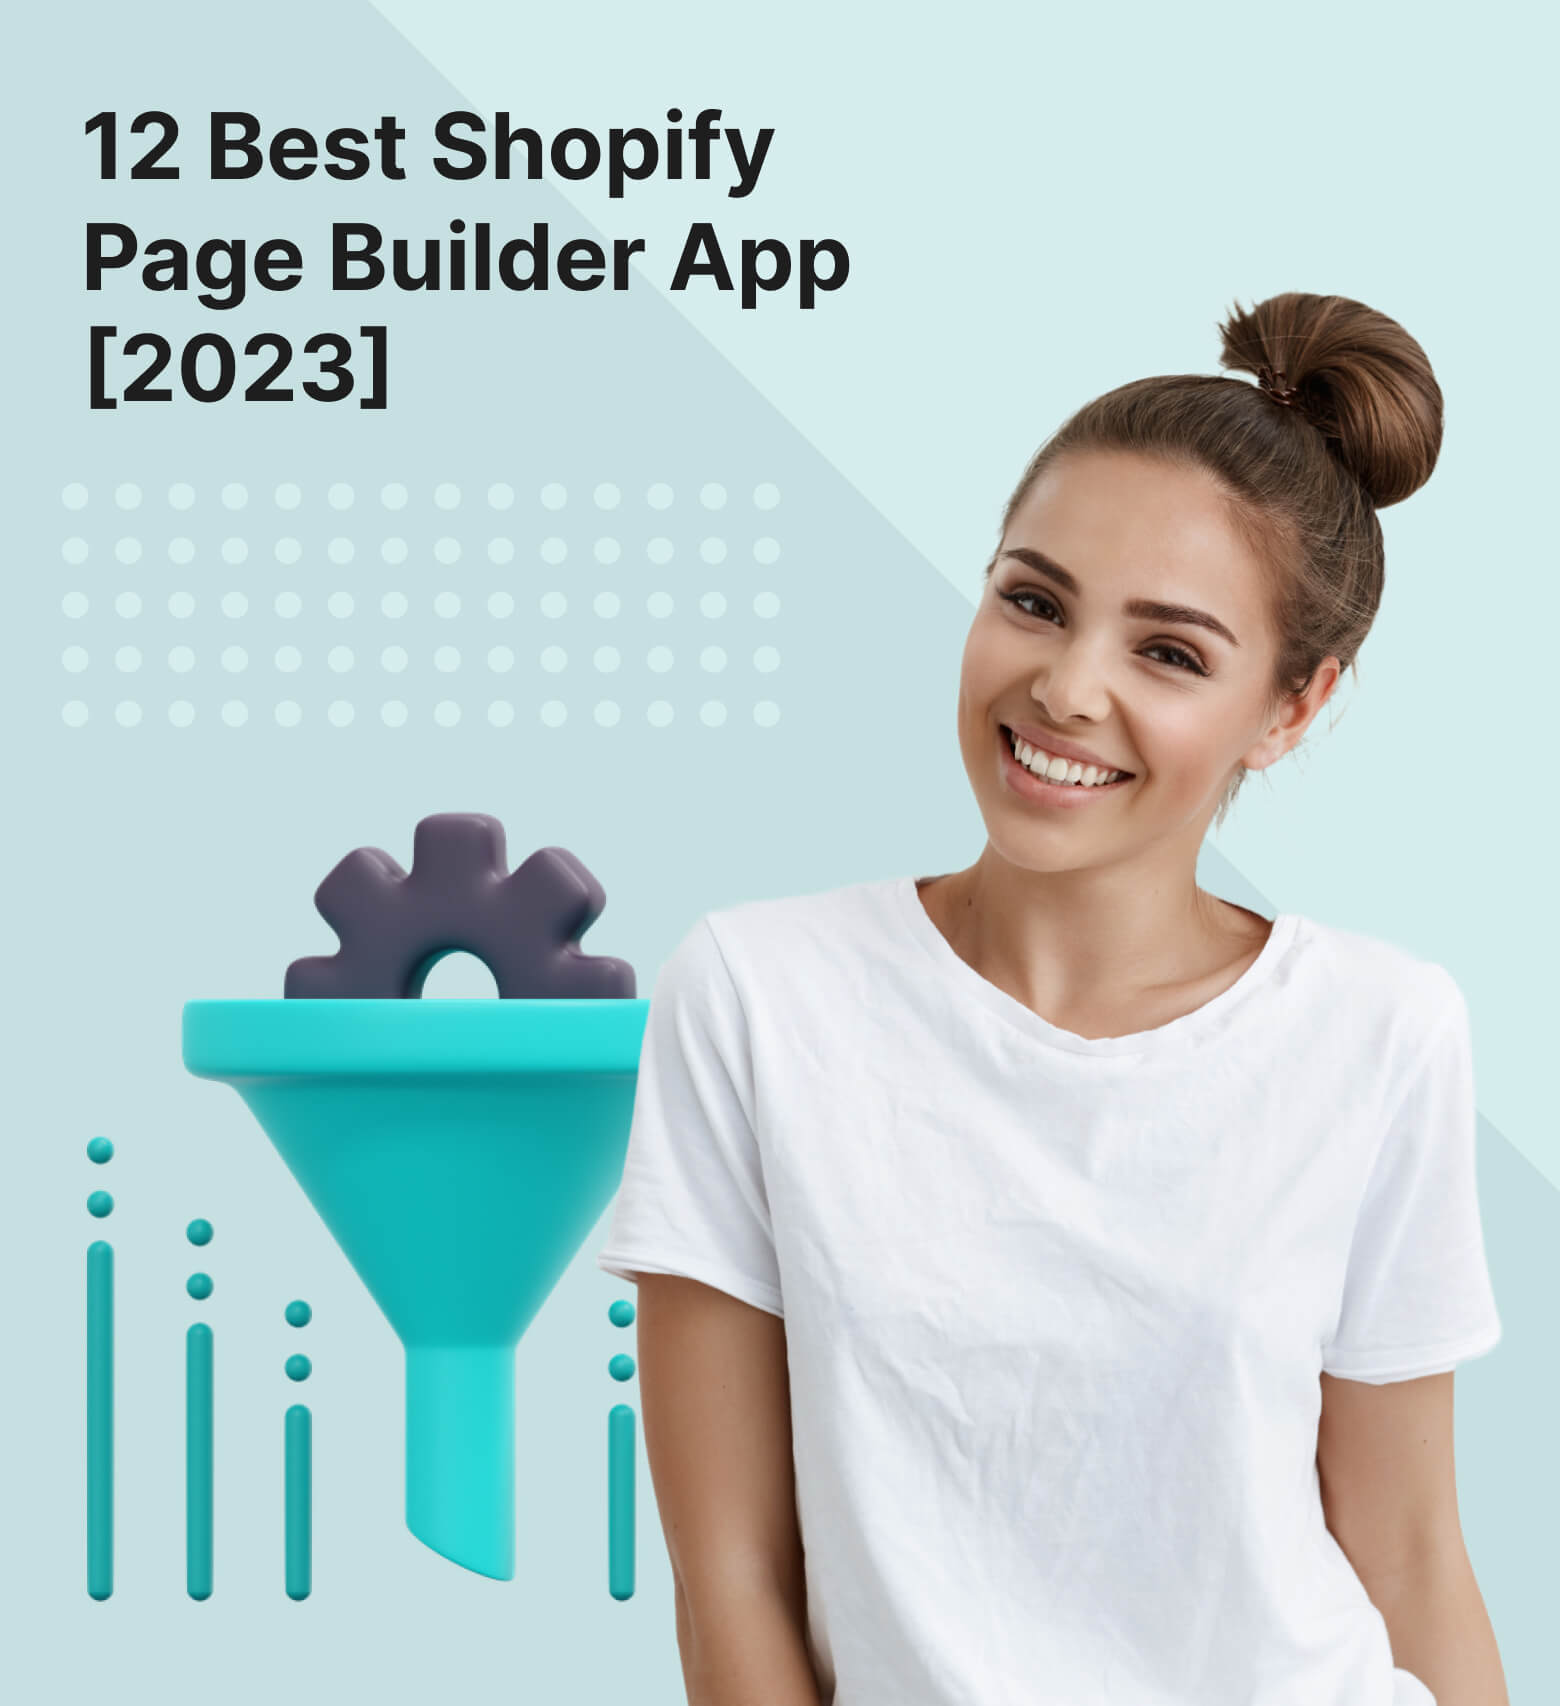 Best Shopify Page Builder App